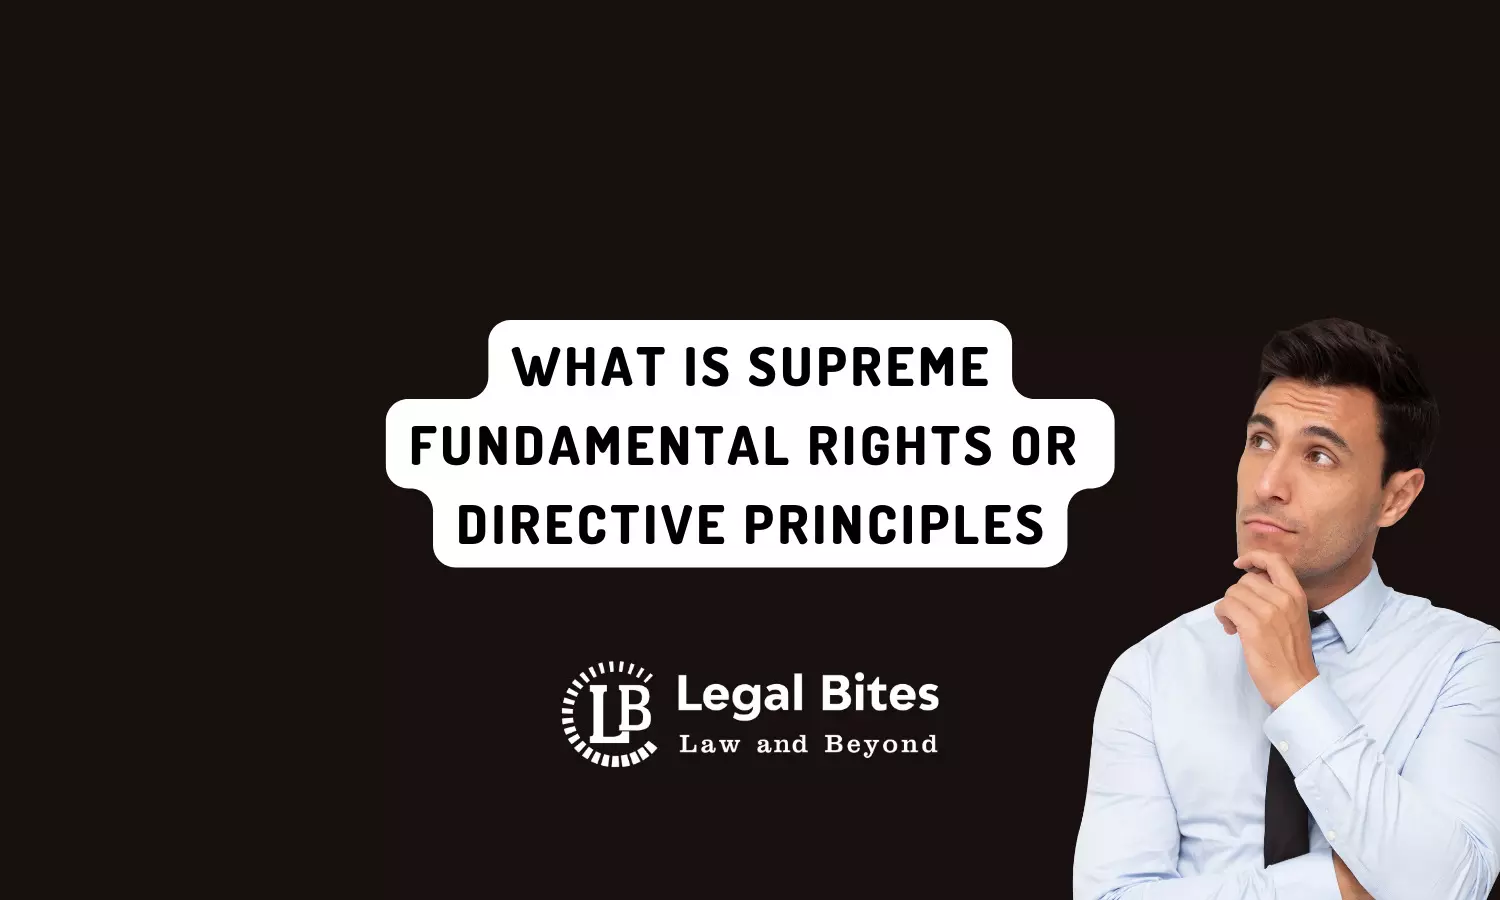 What is Supreme: Fundamental Rights or Directive Principles?